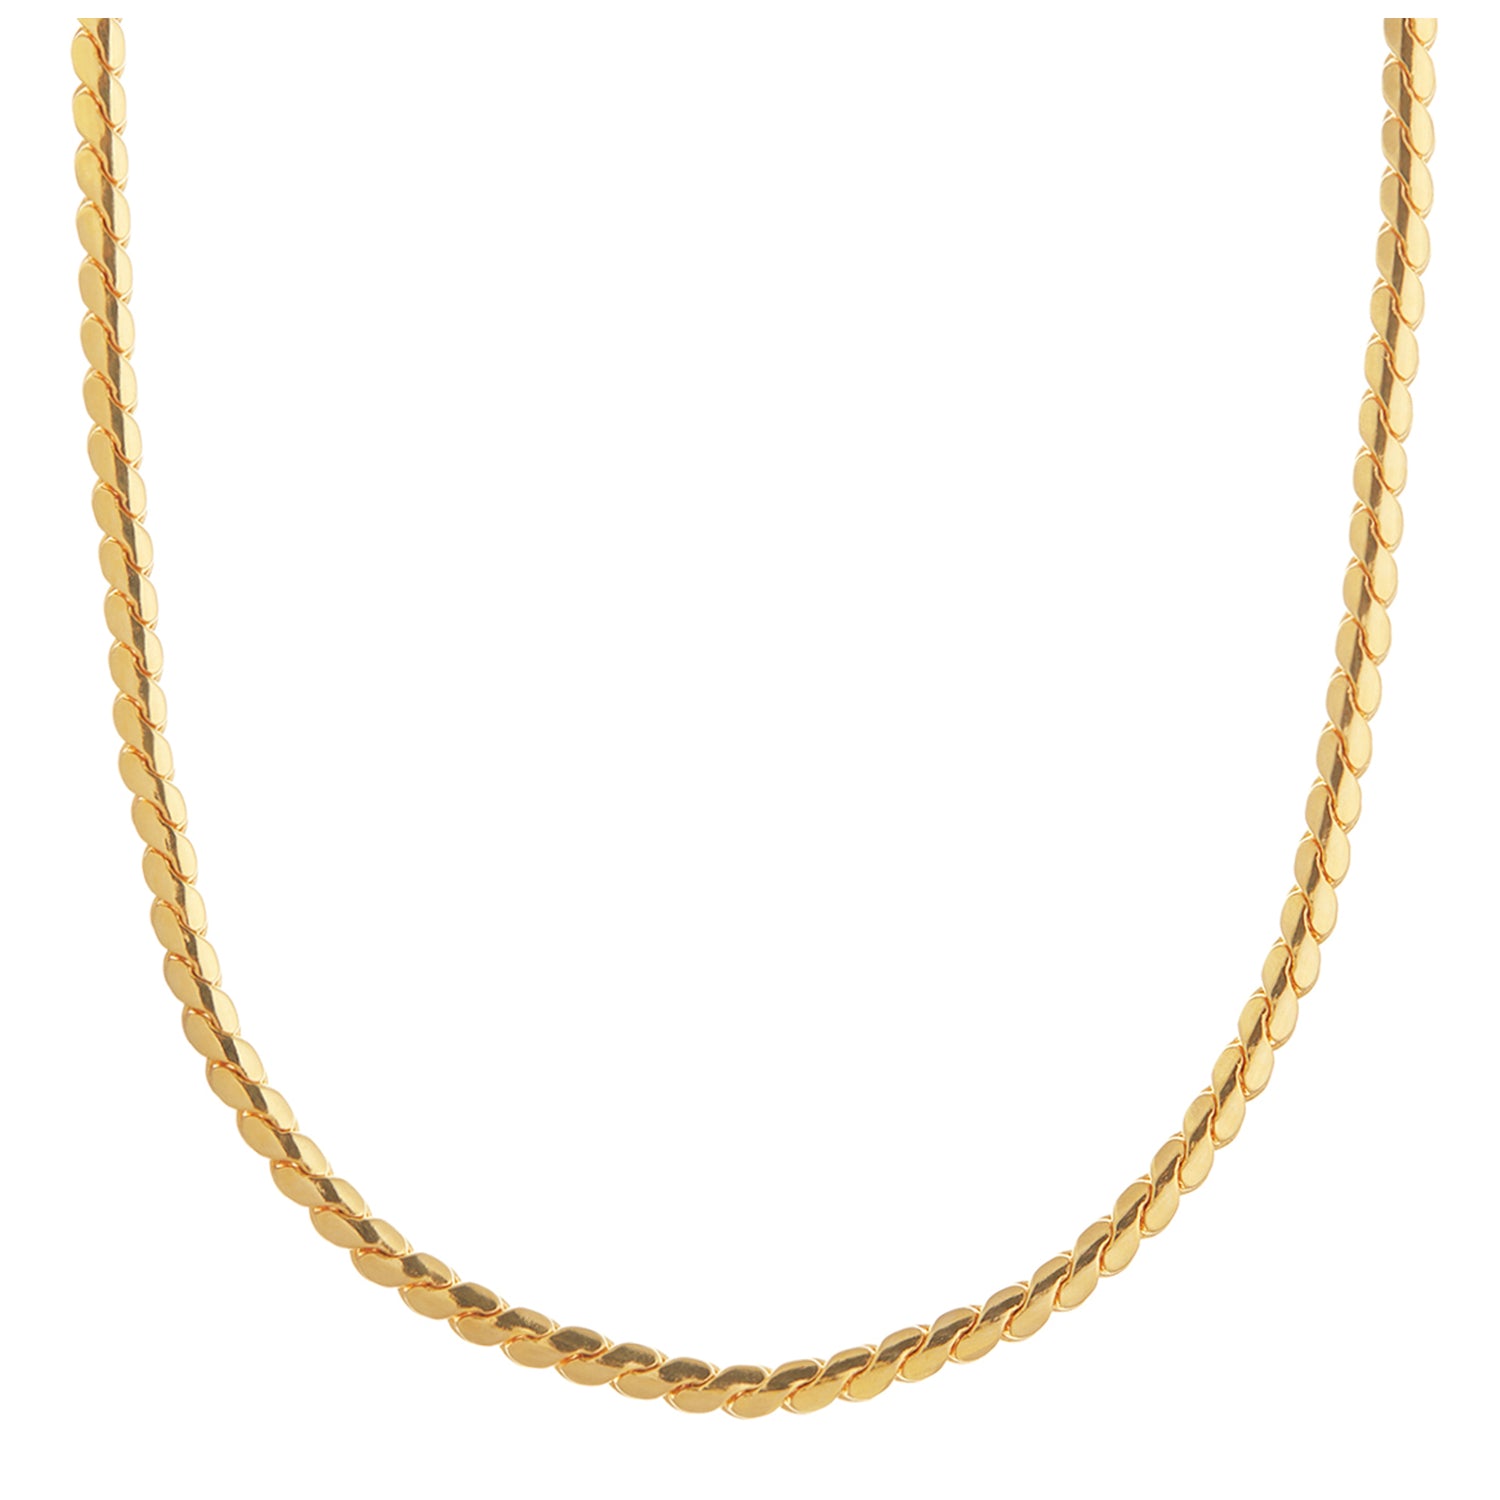 Gold Twisted Snake Chain Necklace | by Oomiay – Oomiay Jewelry